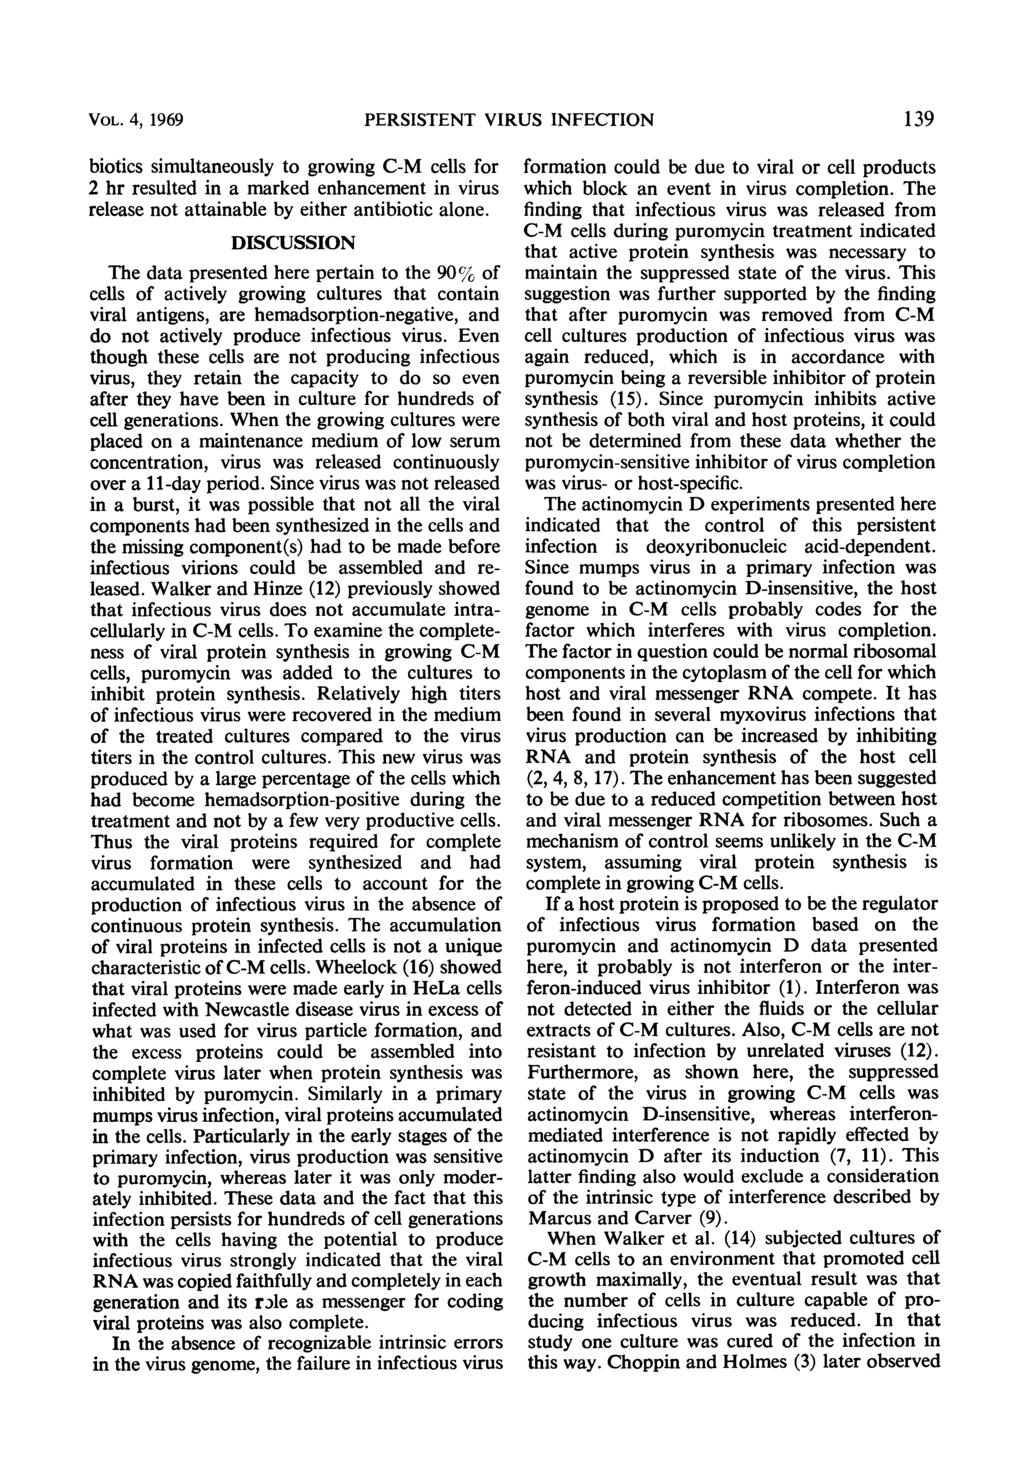 VOL. 4, 1969 PERSISTENT VIRUS INFECTION 139 biotics simultaneously to growing C-M cells for 2 hr resulted in a marked enhancement in virus release not attainable by either antibiotic alone.